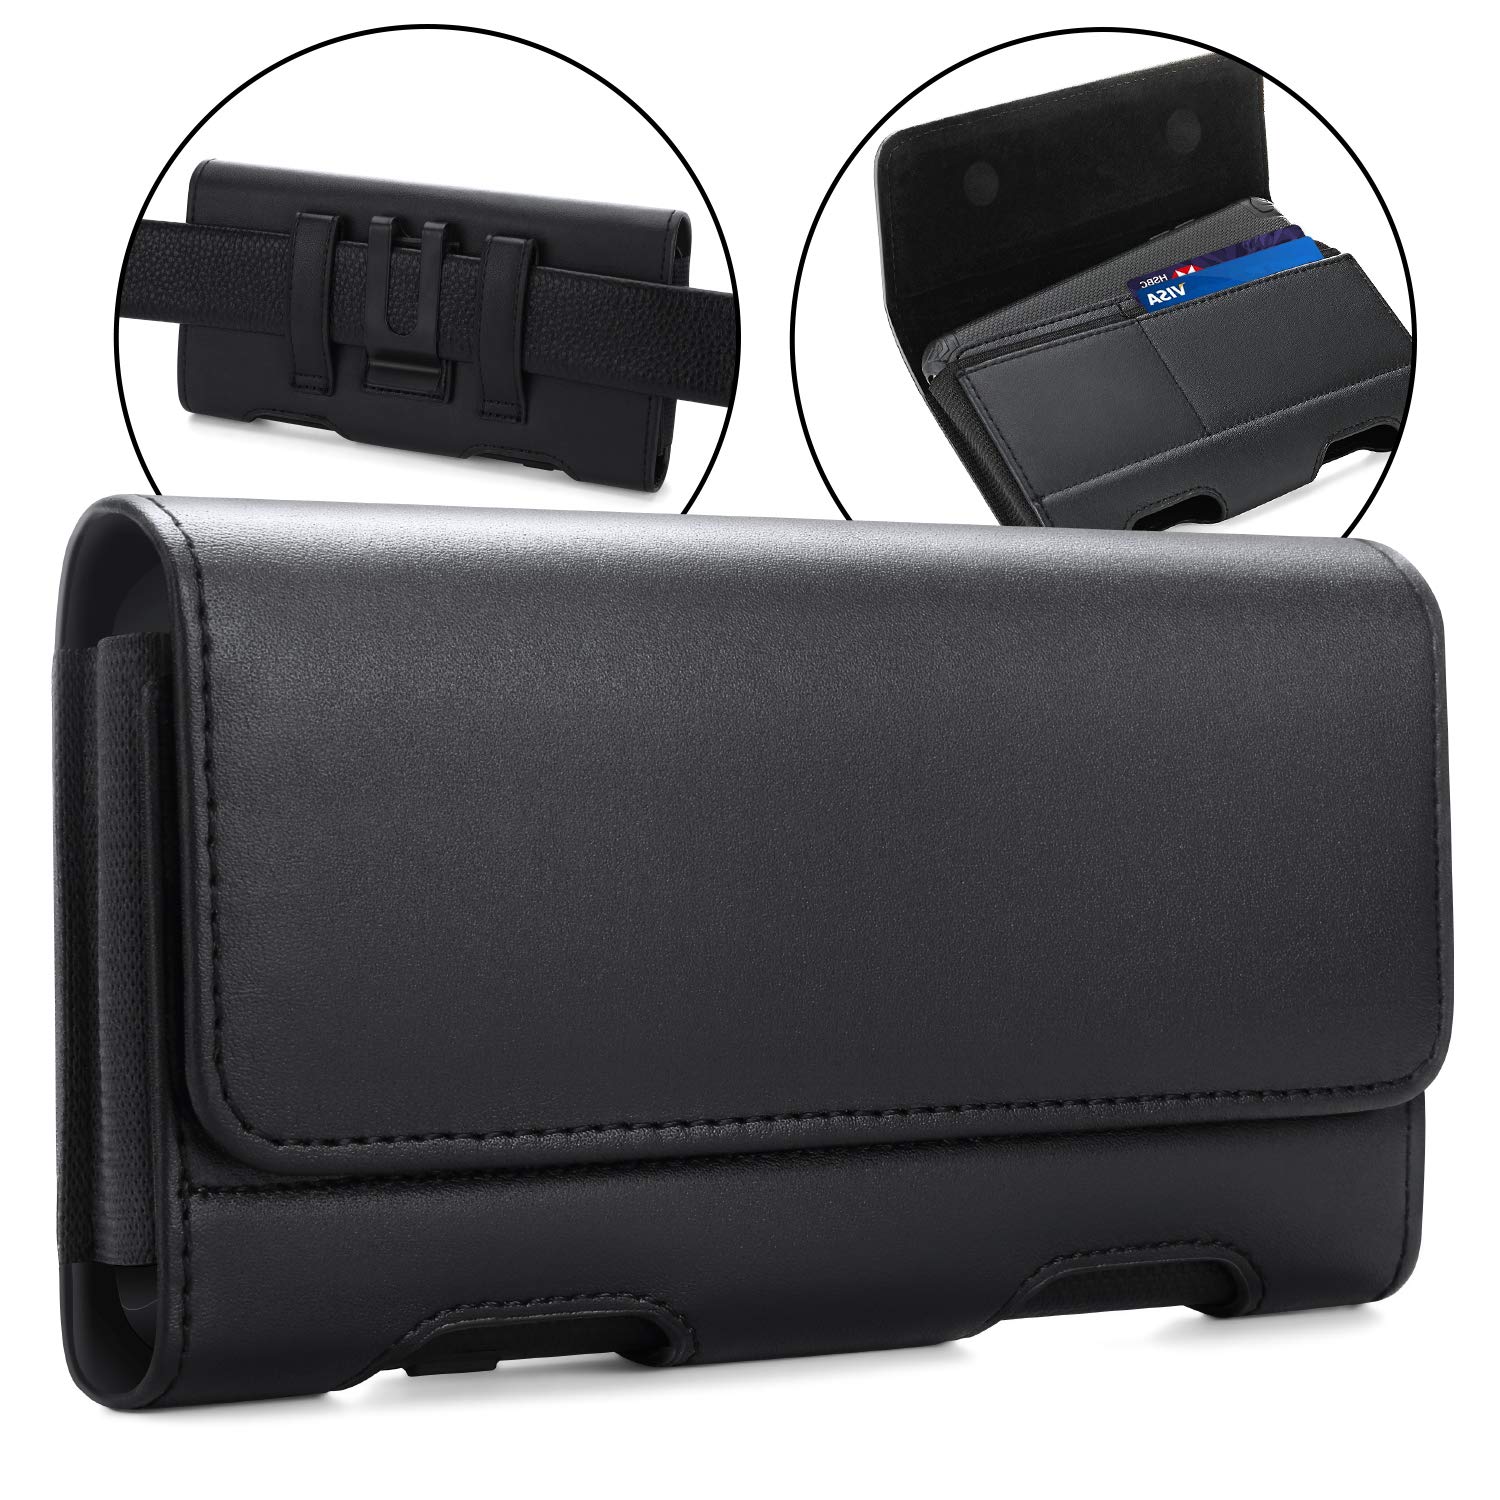 BECPLT Galaxy Note 20 Ultra 5G S22 Ultra 5G Holster Case, Leather iPhone 14 Pro Max Belt Clip Holster Pouch Carrying Sleeve with ID Card Holder for Galaxy A14 A12 A42 A21s Note 10+ Note 20 9 8 (Black)